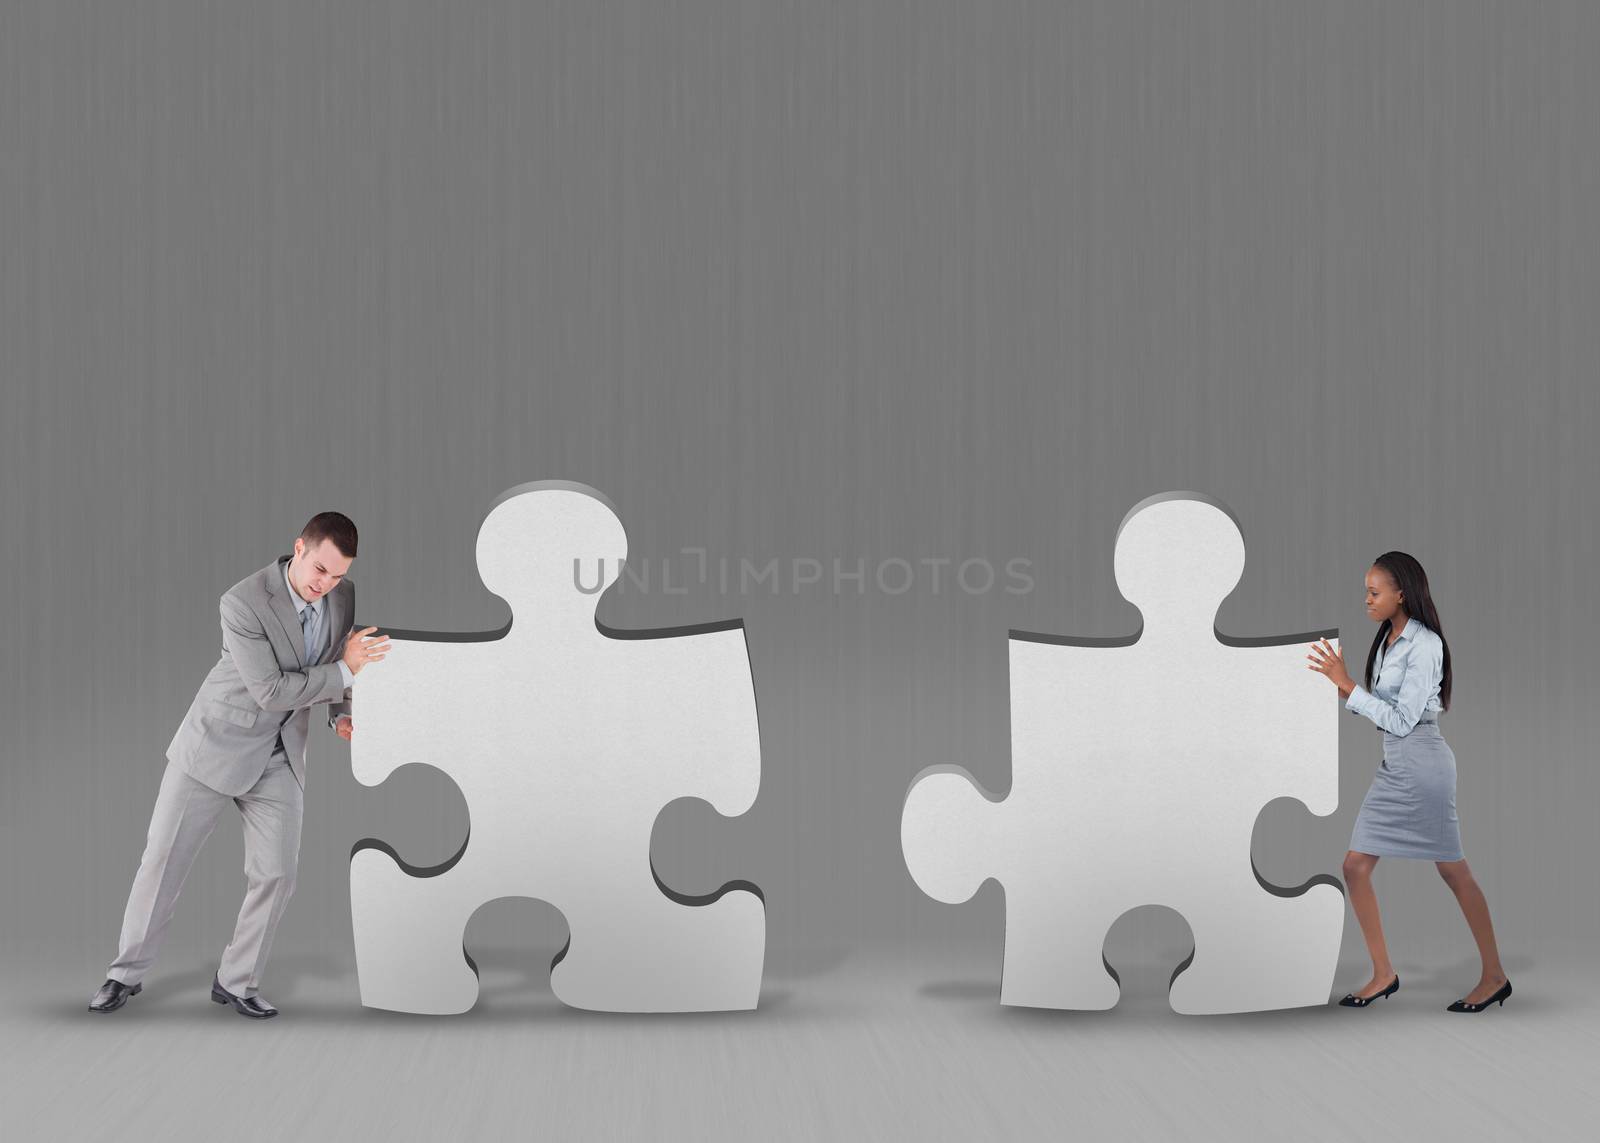 Business people pushing two jigsaw pieces together on grey background